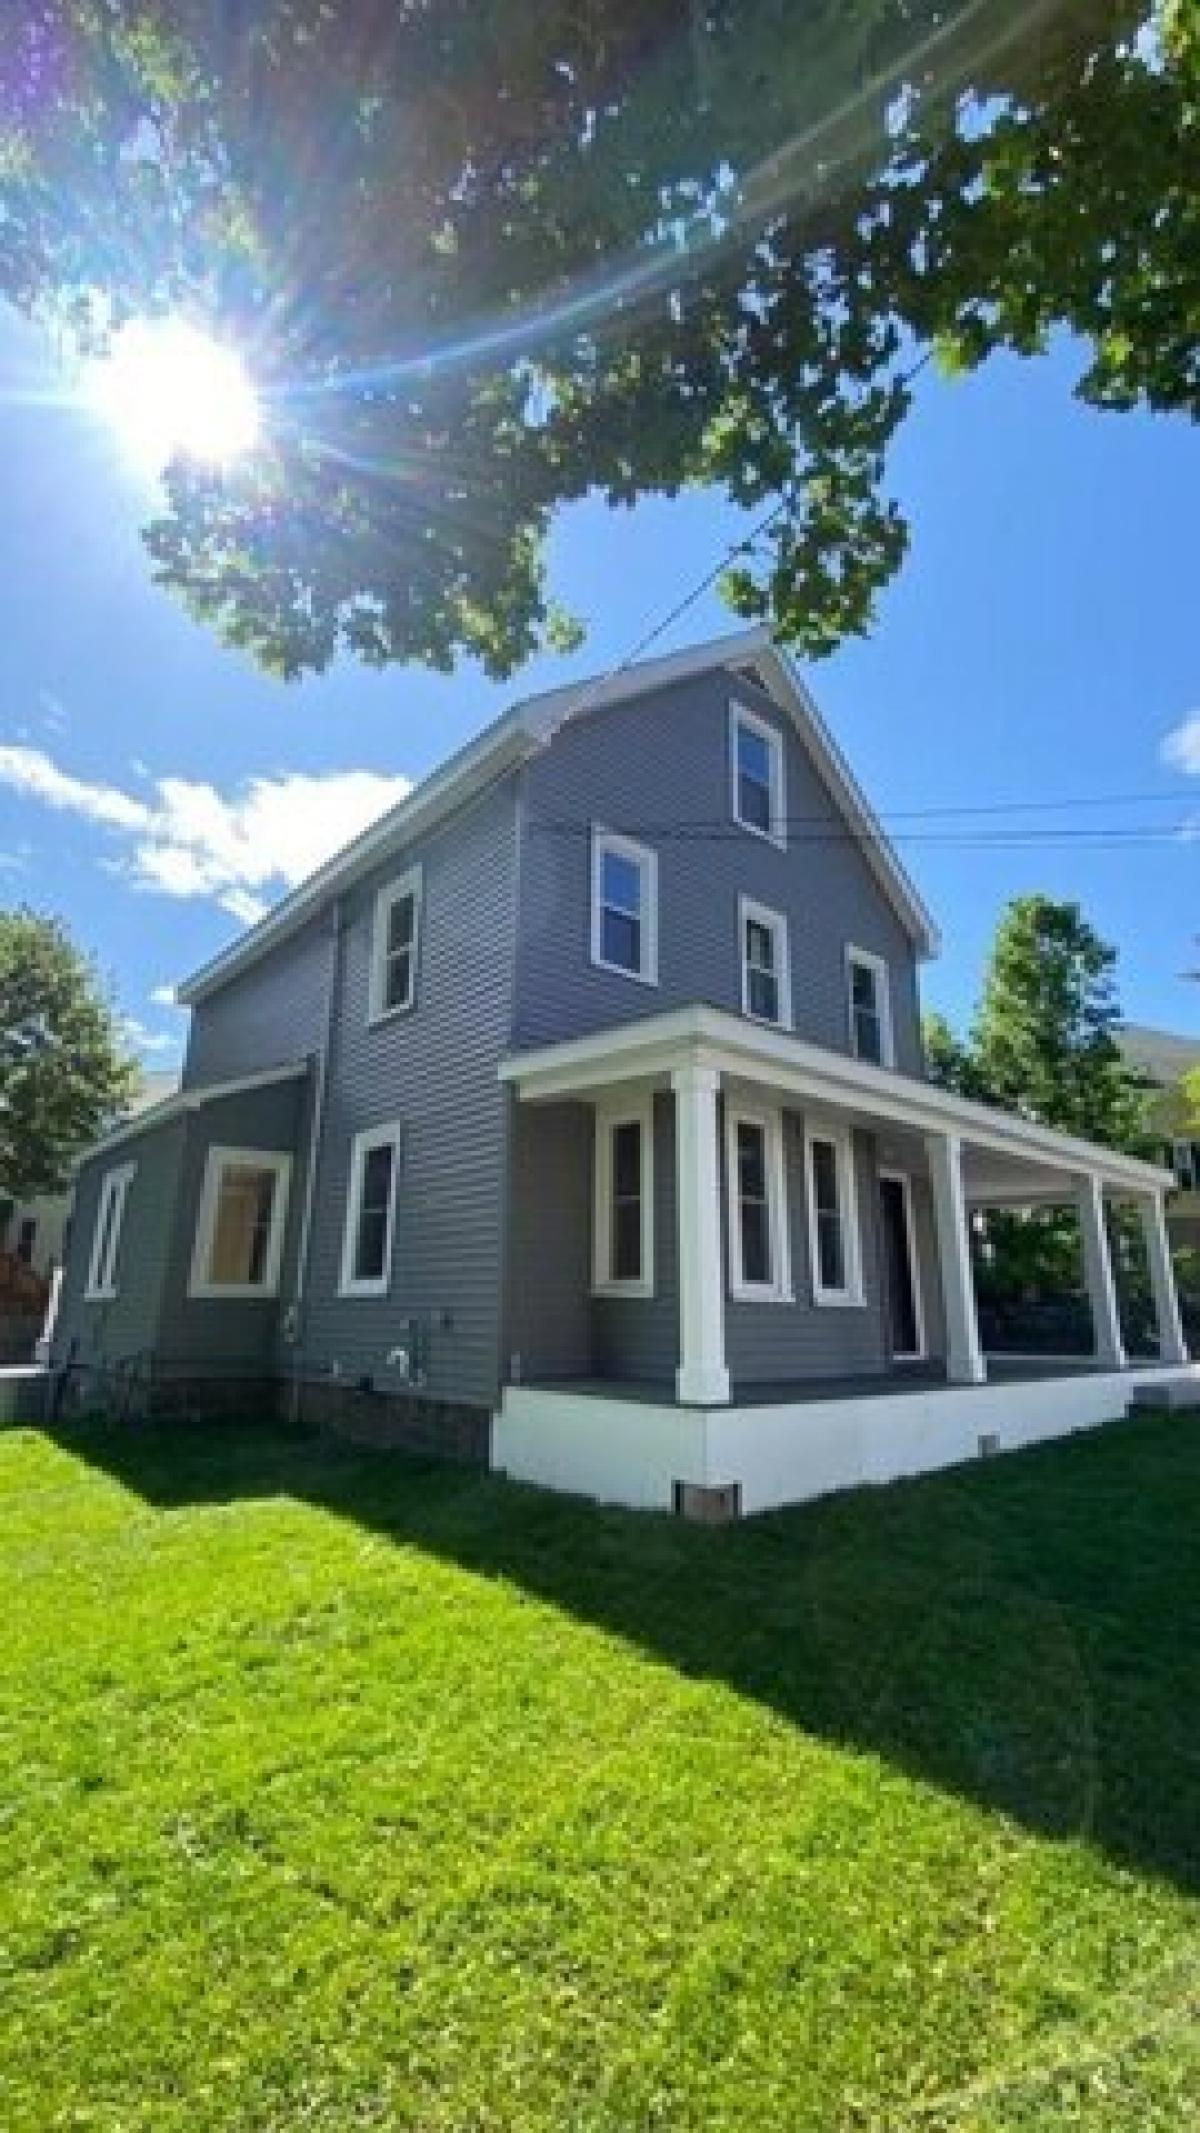 Picture of Home For Sale in Maynard, Massachusetts, United States